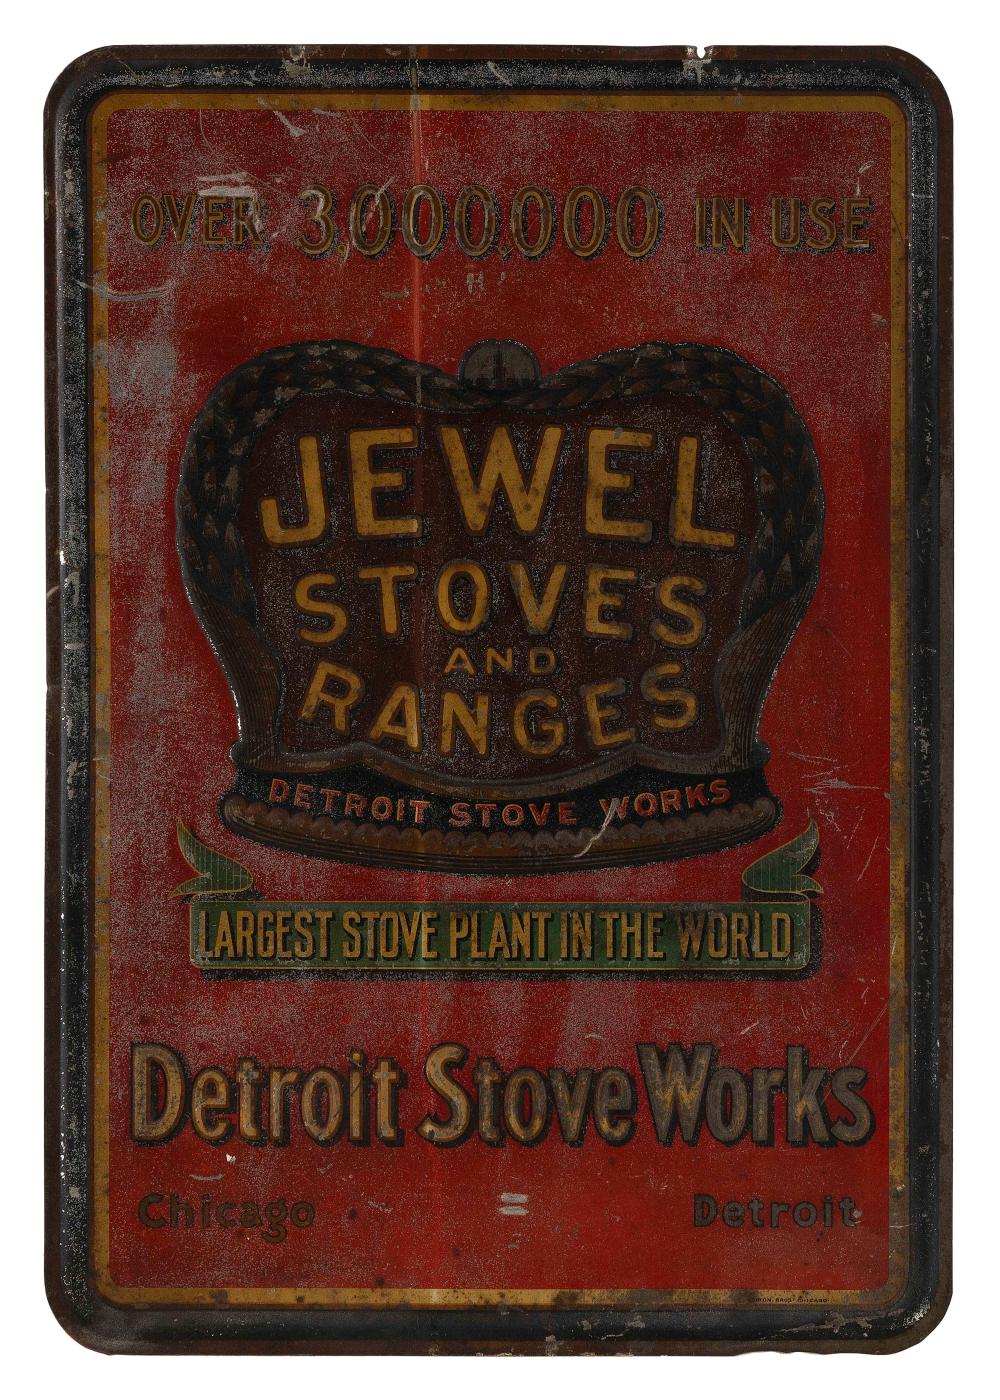 PAINTED TIN ADVERTISING SIGN DETROIT 2f184a